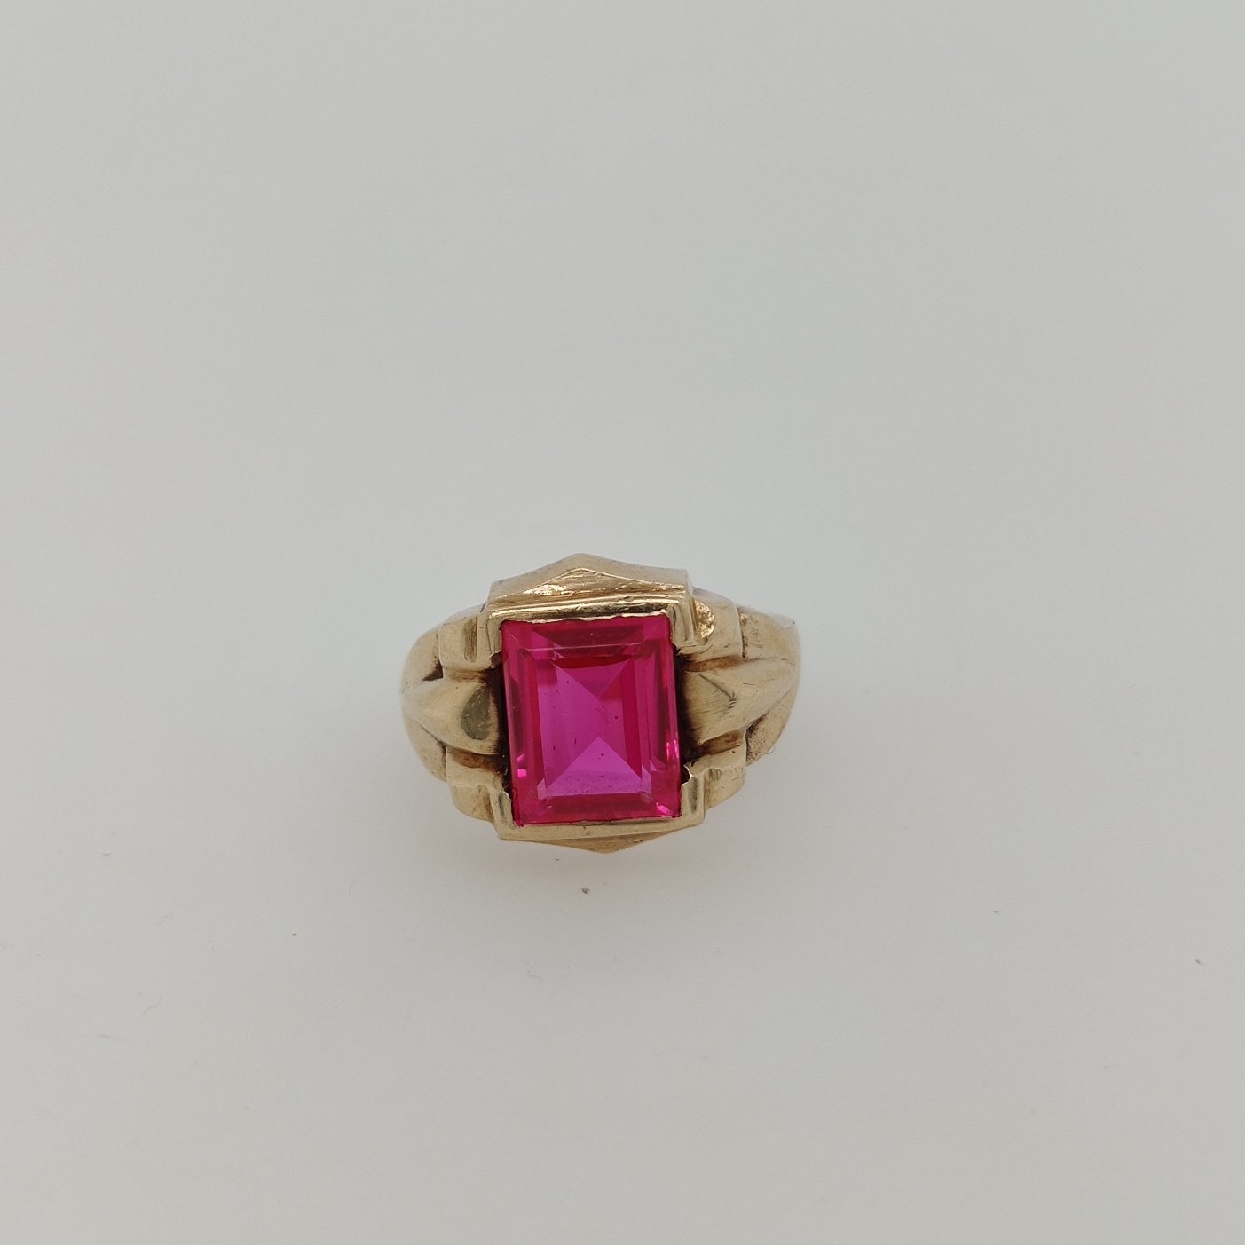 10K Yellow Gold Square Shaped Synthetic Ruby Ring Size 9.25